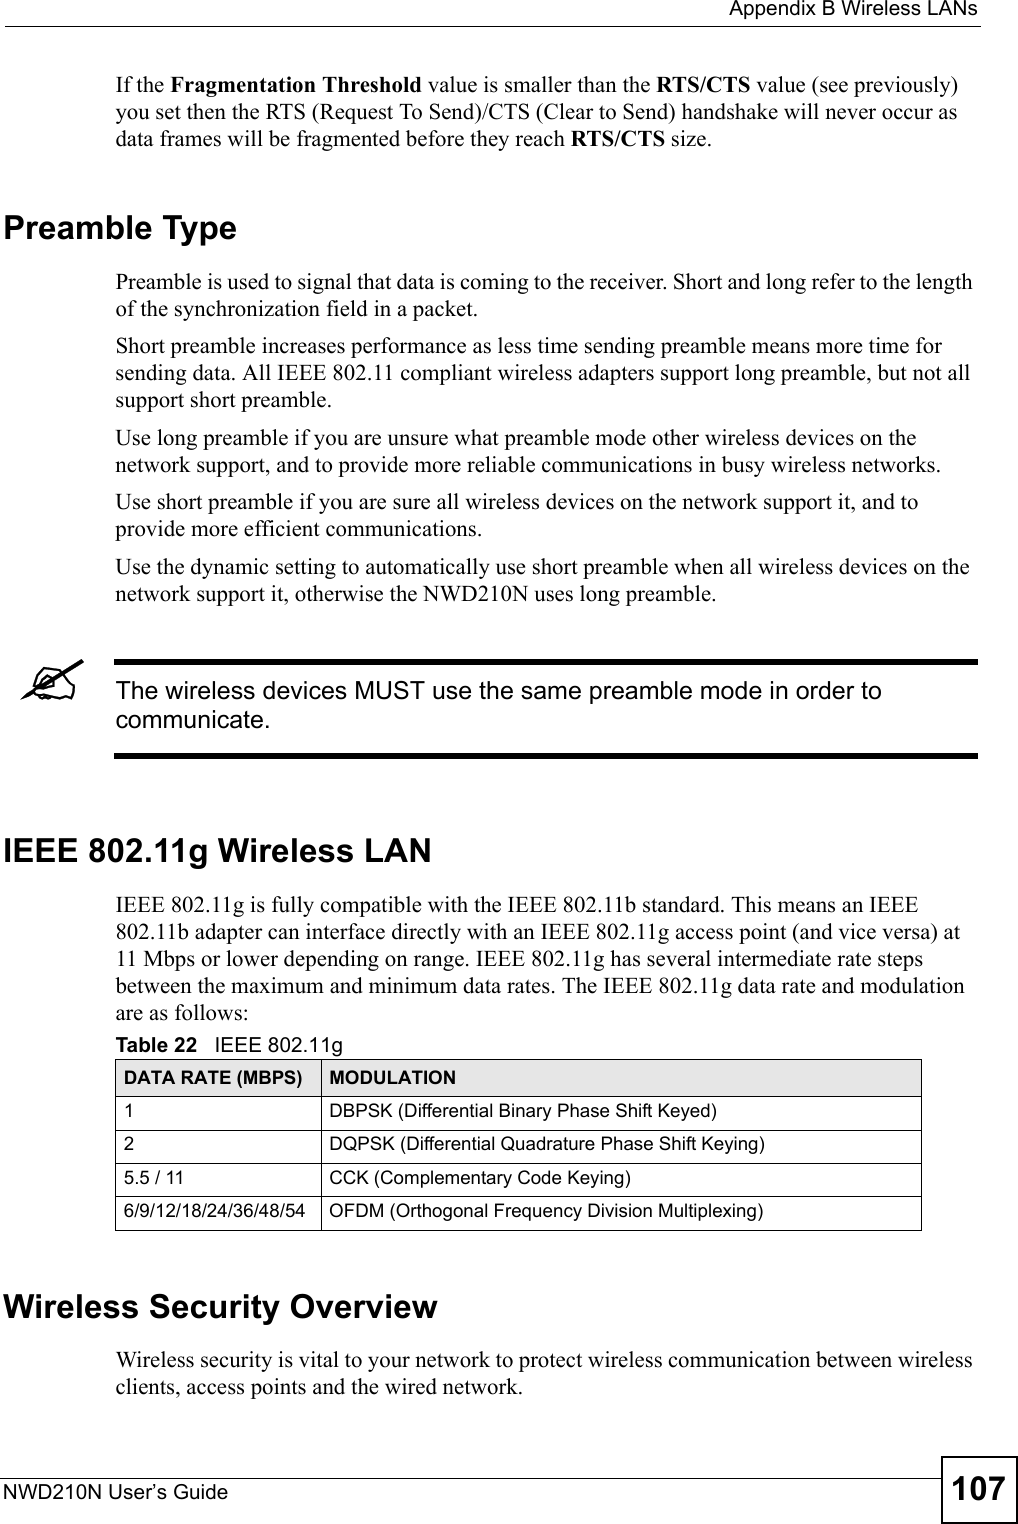  Appendix B Wireless LANsNWD210N User’s Guide 107If the Fragmentation Threshold value is smaller than the RTS/CTS value (see previously) you set then the RTS (Request To Send)/CTS (Clear to Send) handshake will never occur as data frames will be fragmented before they reach RTS/CTS size.Preamble TypePreamble is used to signal that data is coming to the receiver. Short and long refer to the length of the synchronization field in a packet.Short preamble increases performance as less time sending preamble means more time for sending data. All IEEE 802.11 compliant wireless adapters support long preamble, but not all support short preamble. Use long preamble if you are unsure what preamble mode other wireless devices on the network support, and to provide more reliable communications in busy wireless networks. Use short preamble if you are sure all wireless devices on the network support it, and to provide more efficient communications.Use the dynamic setting to automatically use short preamble when all wireless devices on the network support it, otherwise the NWD210N uses long preamble.&quot;The wireless devices MUST use the same preamble mode in order to communicate.IEEE 802.11g Wireless LANIEEE 802.11g is fully compatible with the IEEE 802.11b standard. This means an IEEE 802.11b adapter can interface directly with an IEEE 802.11g access point (and vice versa) at 11 Mbps or lower depending on range. IEEE 802.11g has several intermediate rate steps between the maximum and minimum data rates. The IEEE 802.11g data rate and modulation are as follows:Wireless Security OverviewWireless security is vital to your network to protect wireless communication between wireless clients, access points and the wired network.Table 22   IEEE 802.11gDATA RATE (MBPS) MODULATION1 DBPSK (Differential Binary Phase Shift Keyed)2 DQPSK (Differential Quadrature Phase Shift Keying)5.5 / 11 CCK (Complementary Code Keying) 6/9/12/18/24/36/48/54 OFDM (Orthogonal Frequency Division Multiplexing) 